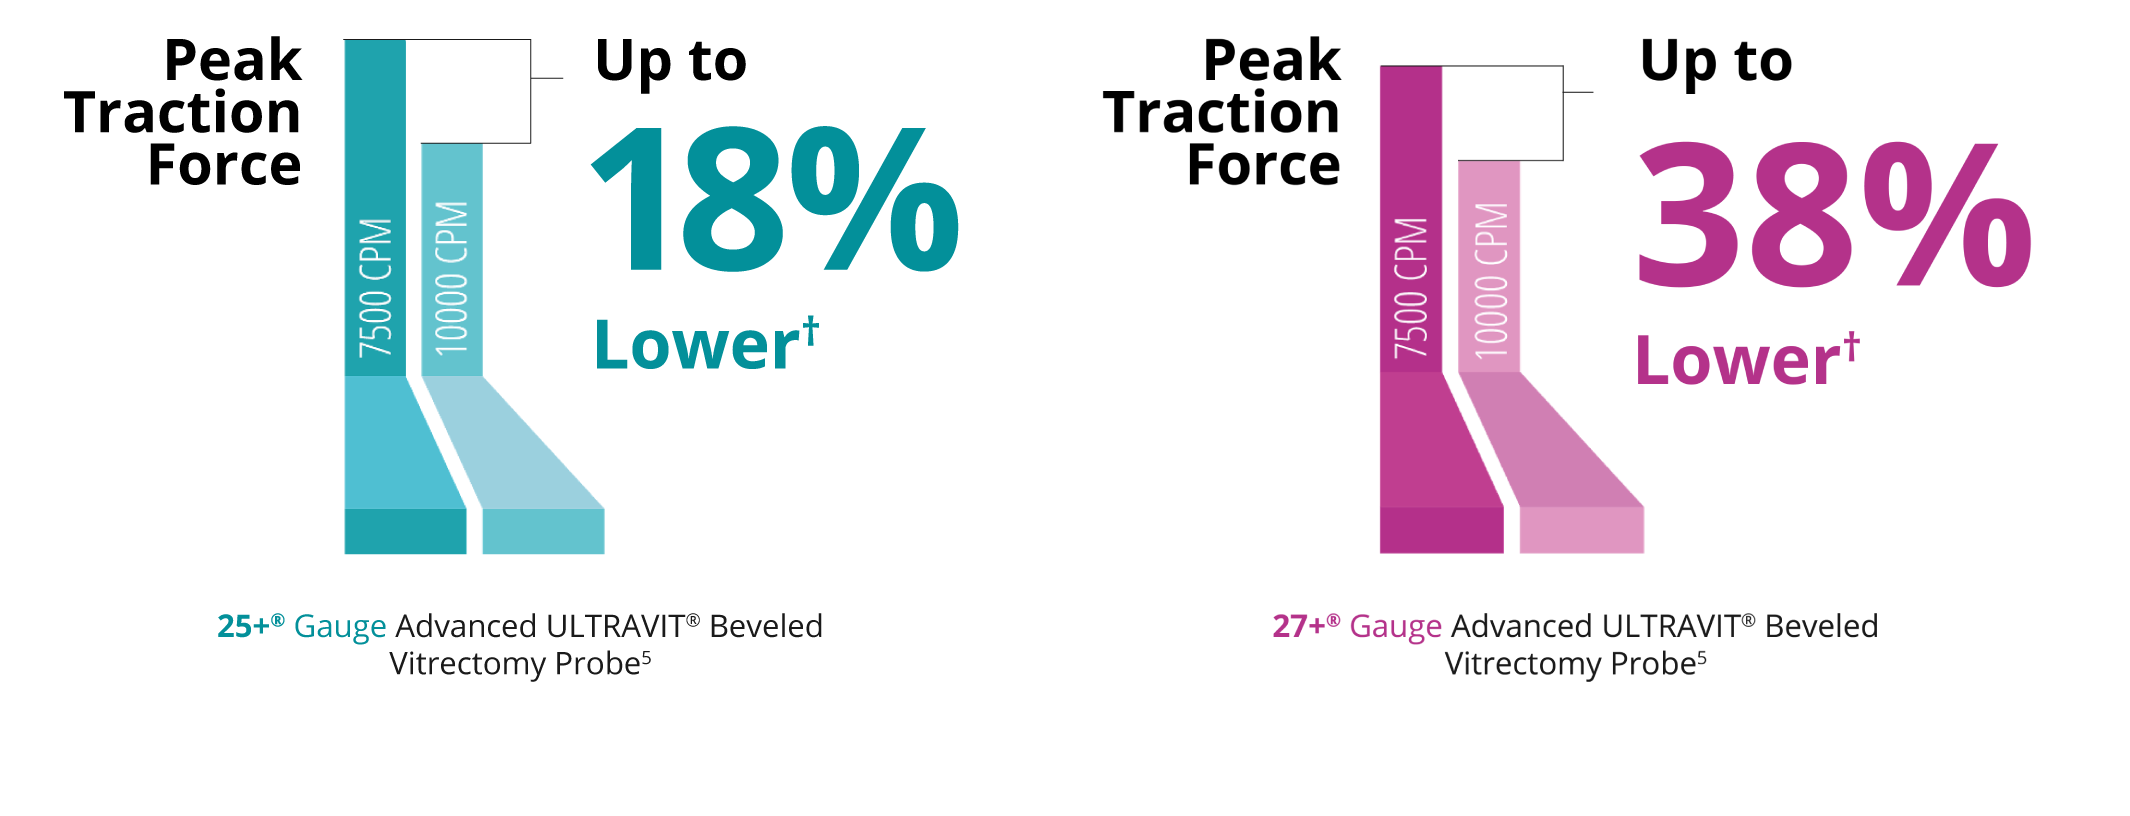 A bar graph comparing the peak traction force of the 7.5K and 10K 25+ Gauge Ultravit probe. The 10K probe in Core Vitrectomy mode has 18% lower peak traction force. A bar graph comparing the peak traction force of the 7.5K and 10K 27+ Gauge Ultravit probe. The 10K probe in Core Vitrectomy mode has 38% lower peak traction force.